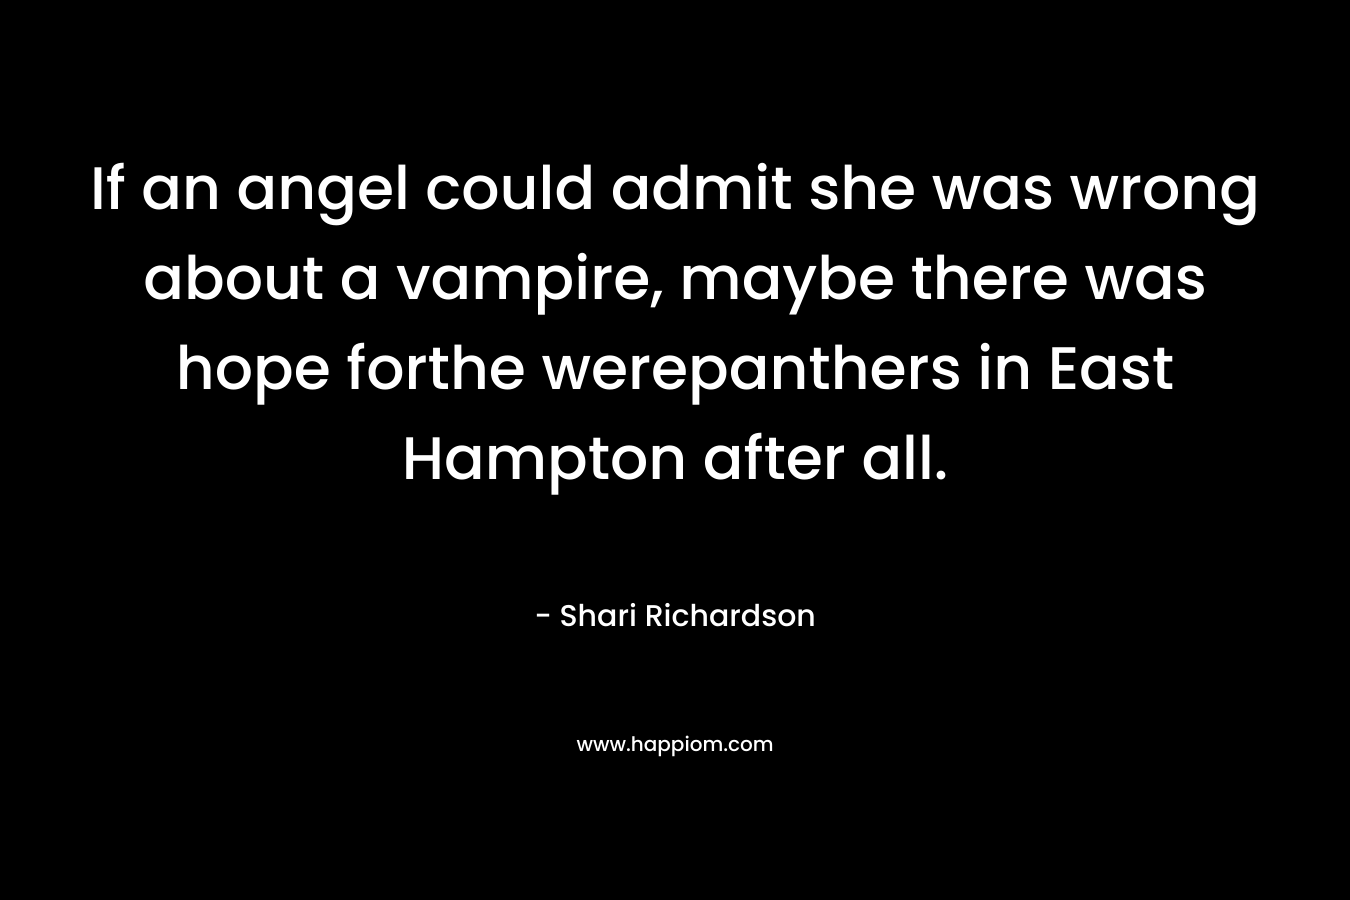 If an angel could admit she was wrong about a vampire, maybe there was hope forthe werepanthers in East Hampton after all. – Shari Richardson